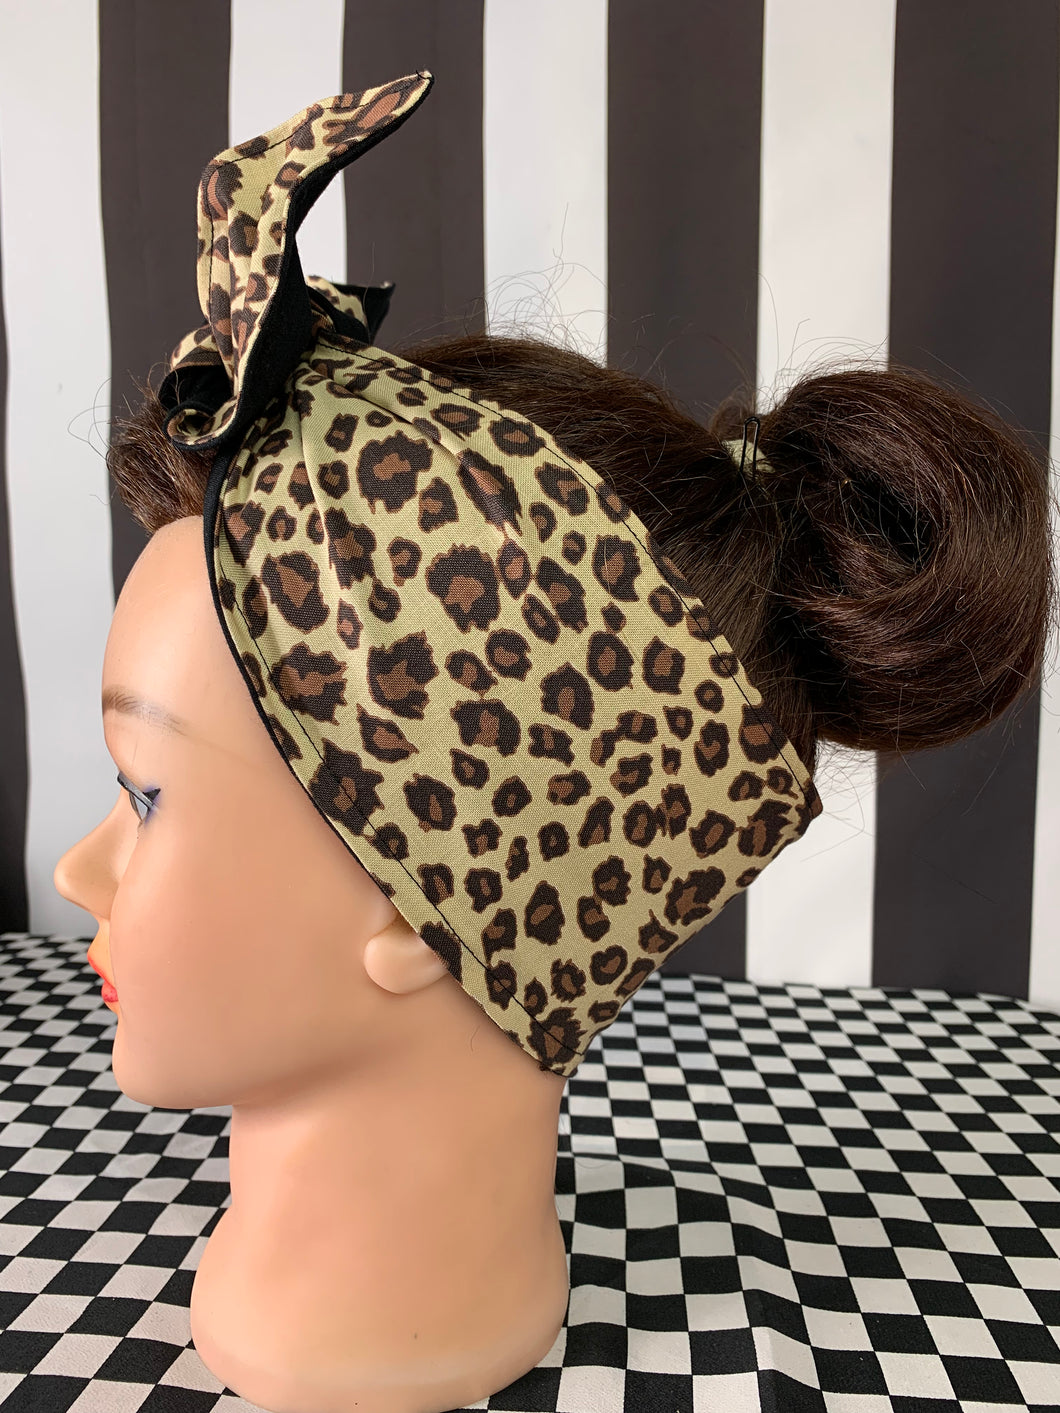 Pinup themed wired headbands